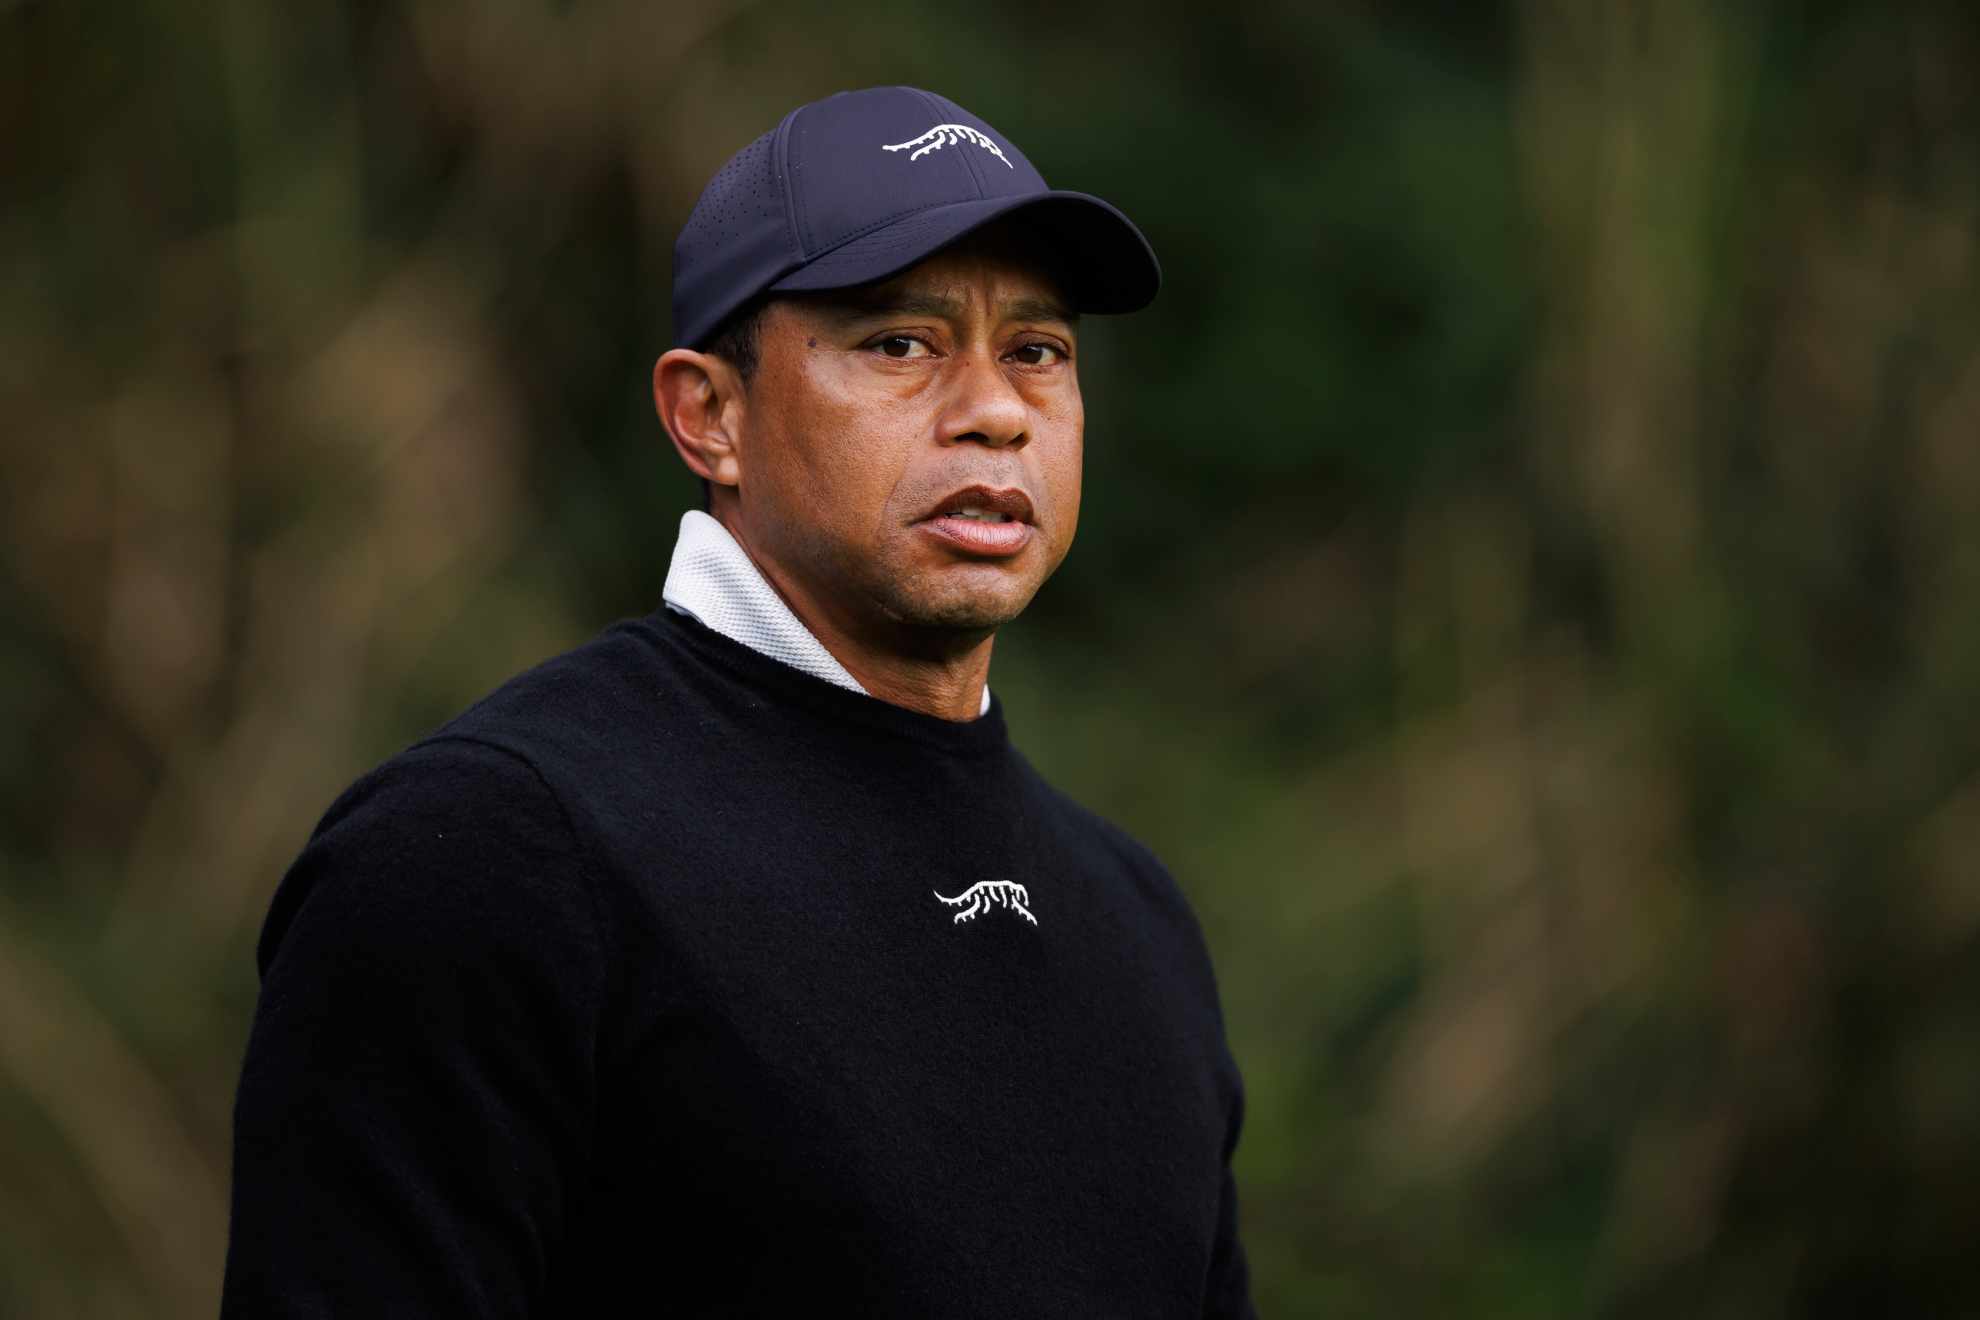 Tiger Woods looks on after his tee shot on the sixth hole during the Genesis Invitational pro-am golf event /